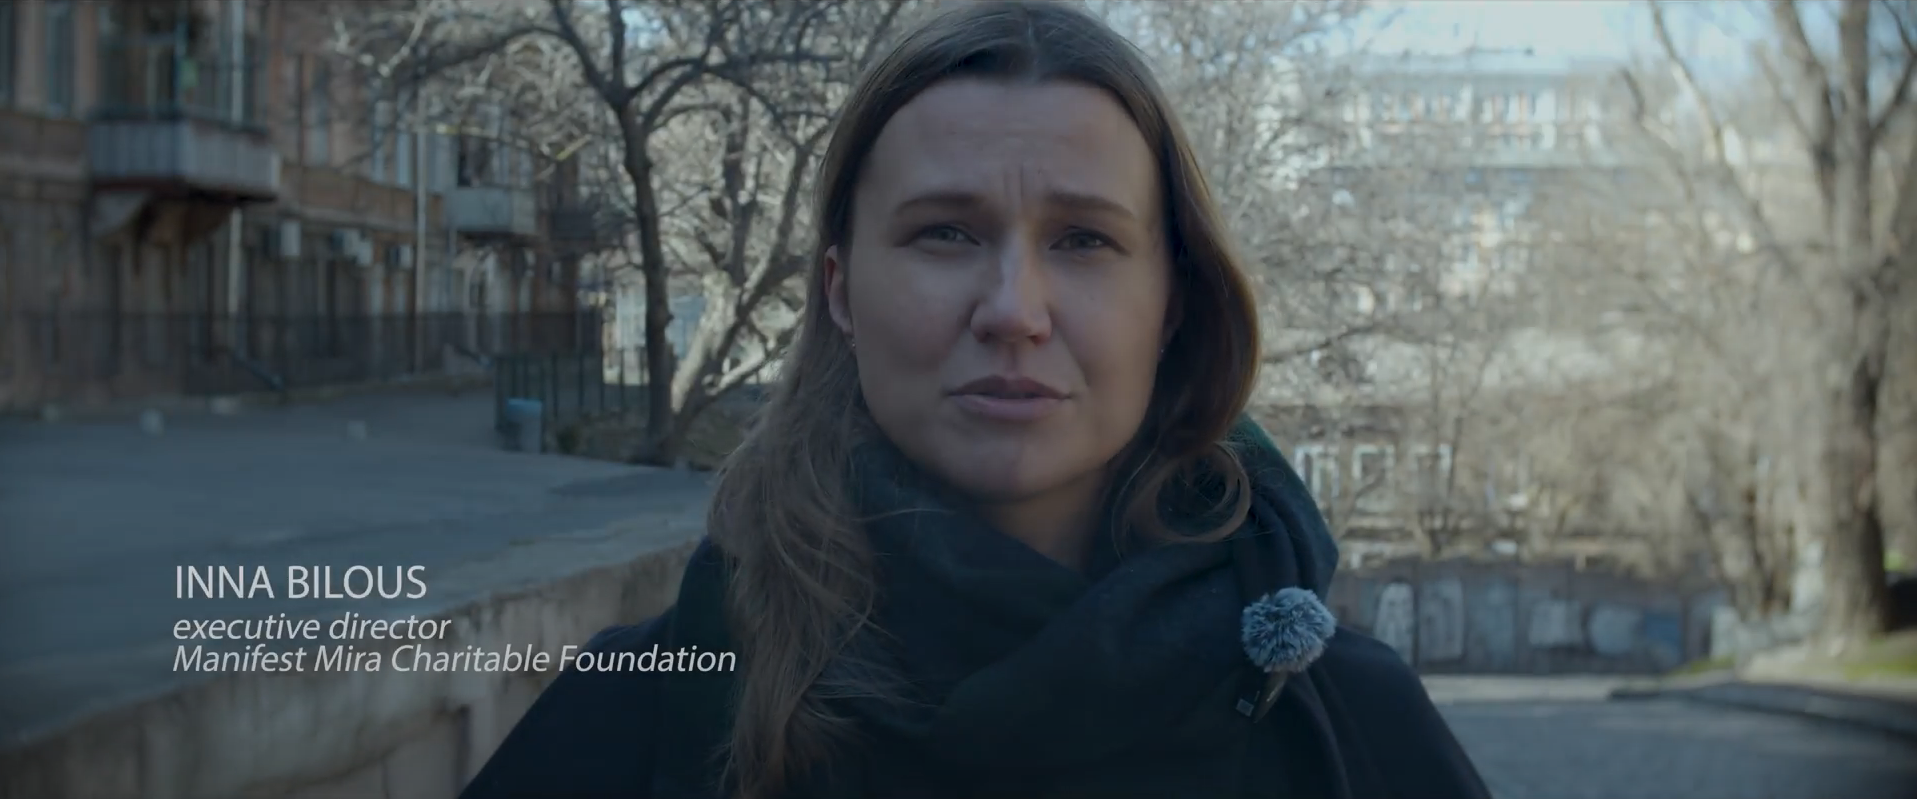 Load video: Inna Bilous Executive Director of Manifest Mira speak about the impact of donations